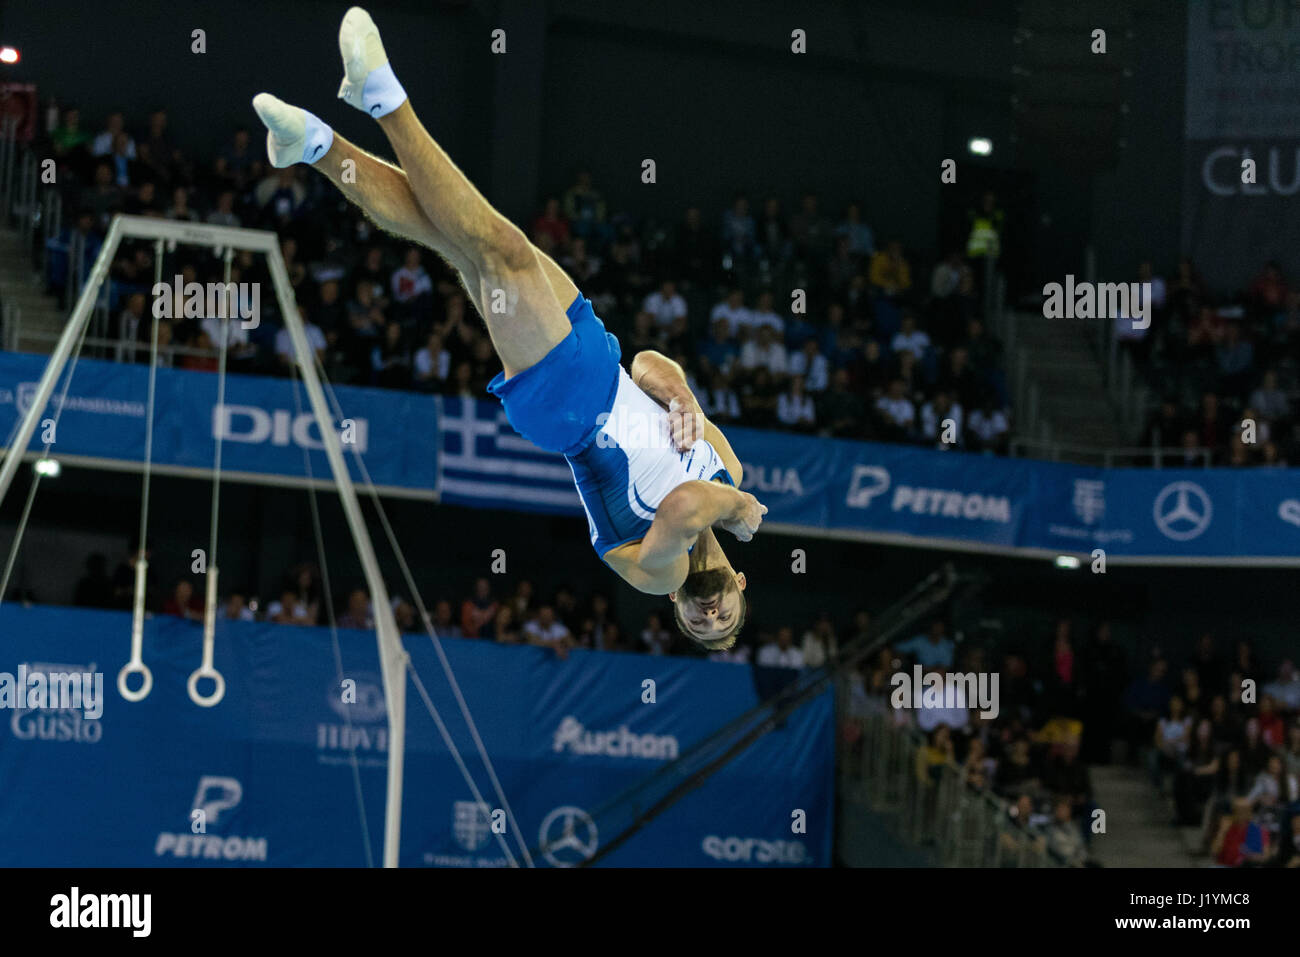 Alexander Shatilov (ISR) performs on the floor during the Men's Apparatus Finals at the European Men's and Women's Artistic Gymnastics Championships in Cluj Napoca, Romania. 22.04.2017 Photo: Catalin Soare/dpa Stock Photo